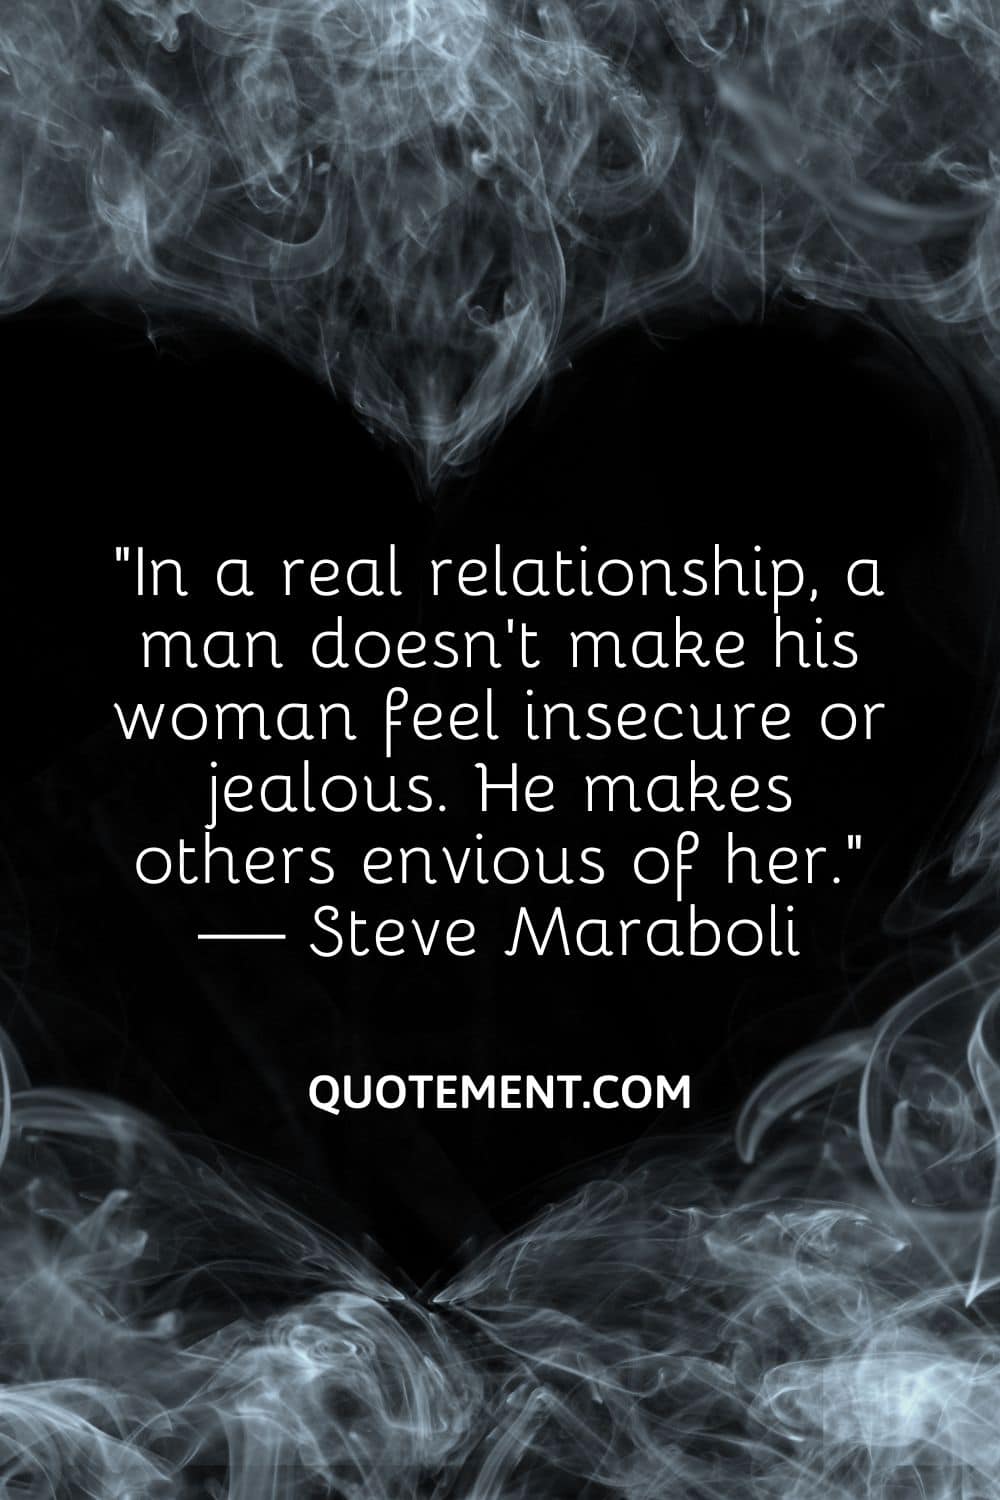 In a real relationship, a man doesn’t make his woman feel insecure or jealous